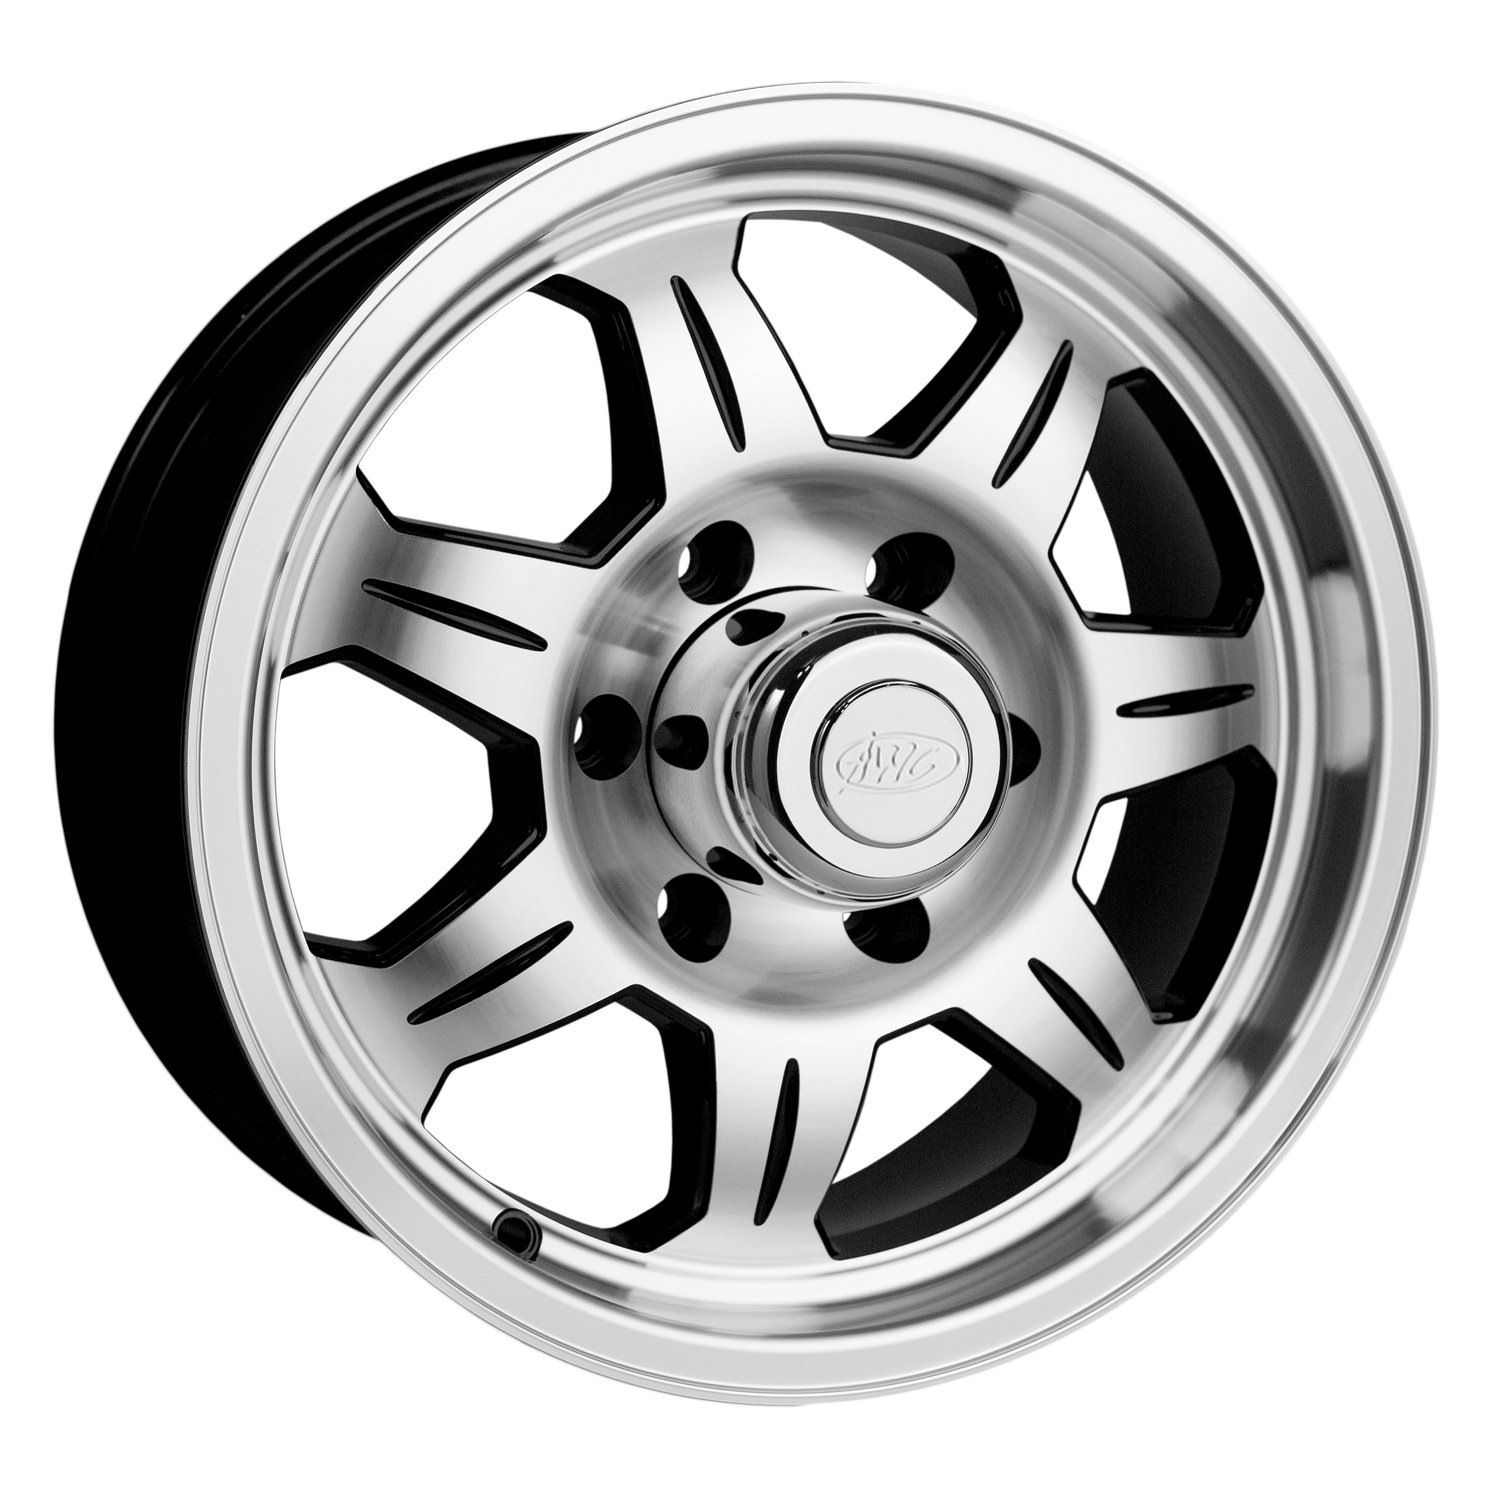 870 ELEMENT Trailer Wheel Size: 15 X 6" Bolt Pattern: 5 x 4.50" (114.30 mm) [Machined with Black Accents]